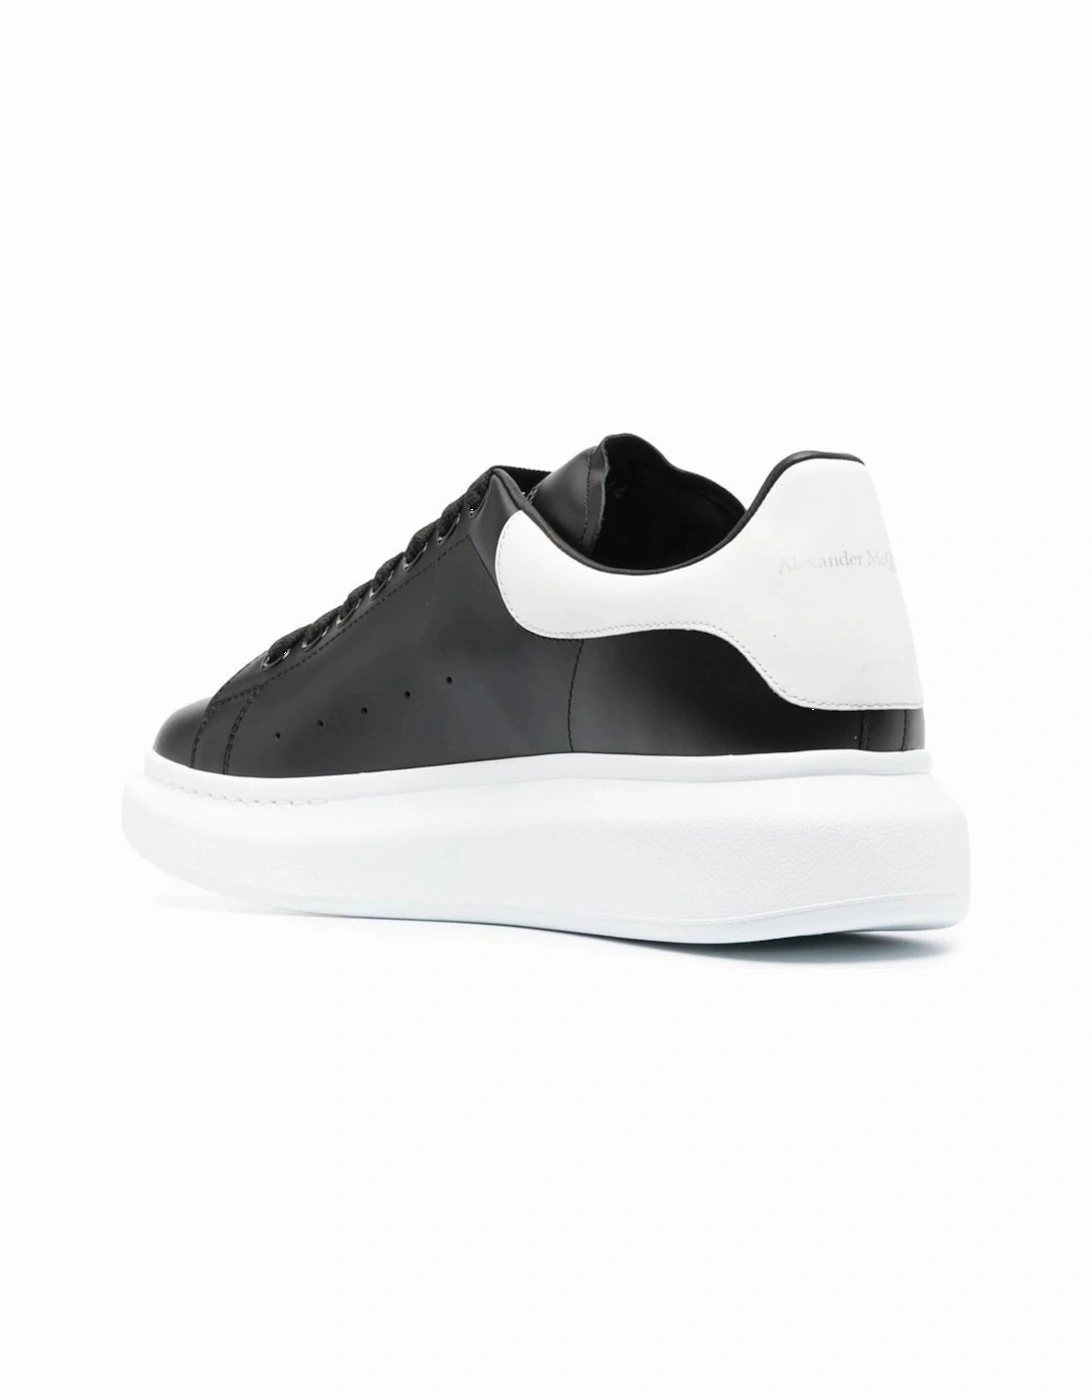 Oversize Sole White Back Sneakers Black